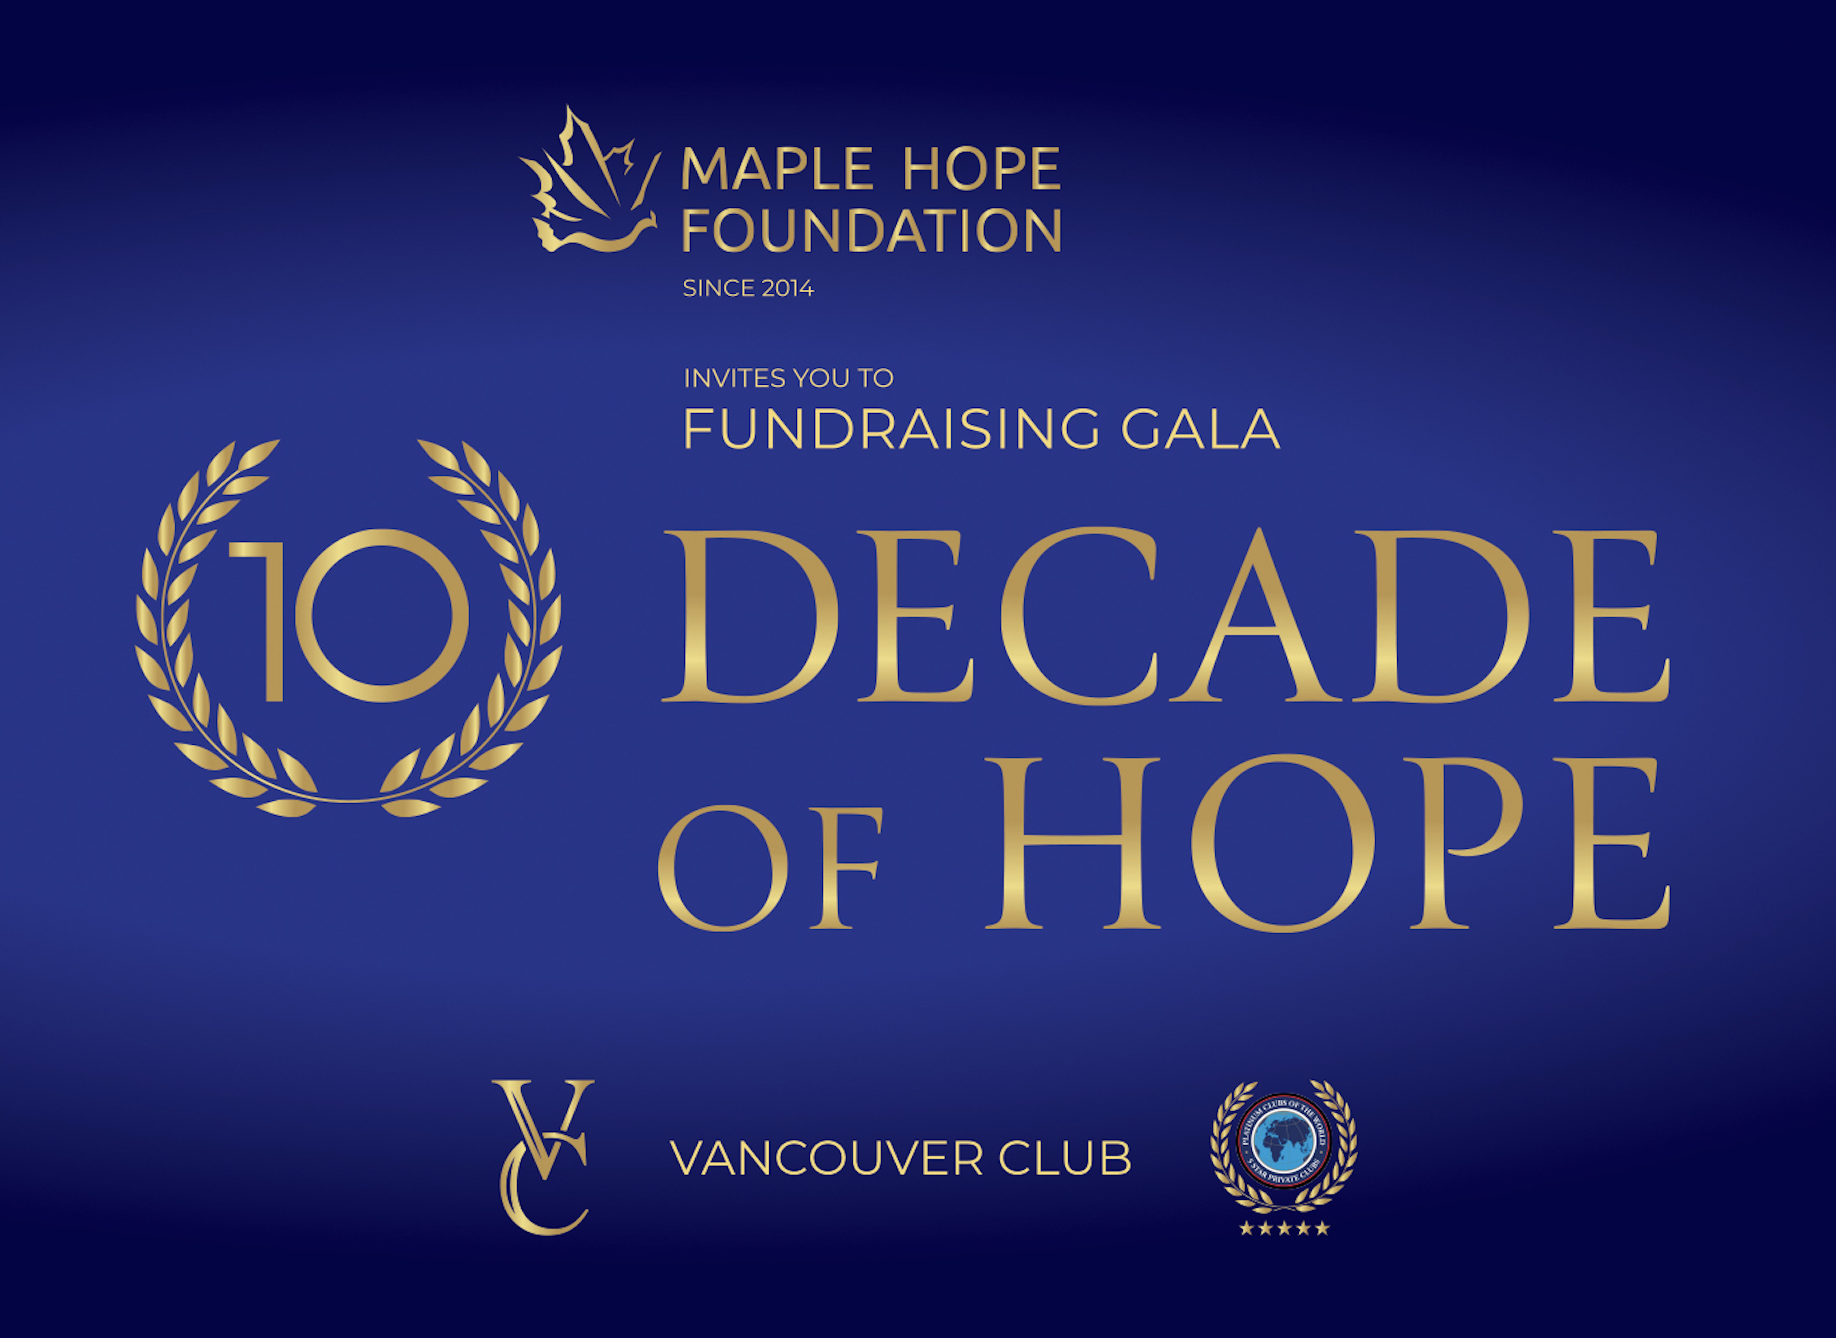 "Decade of Hope" 2nd Annual Fundraising Gala